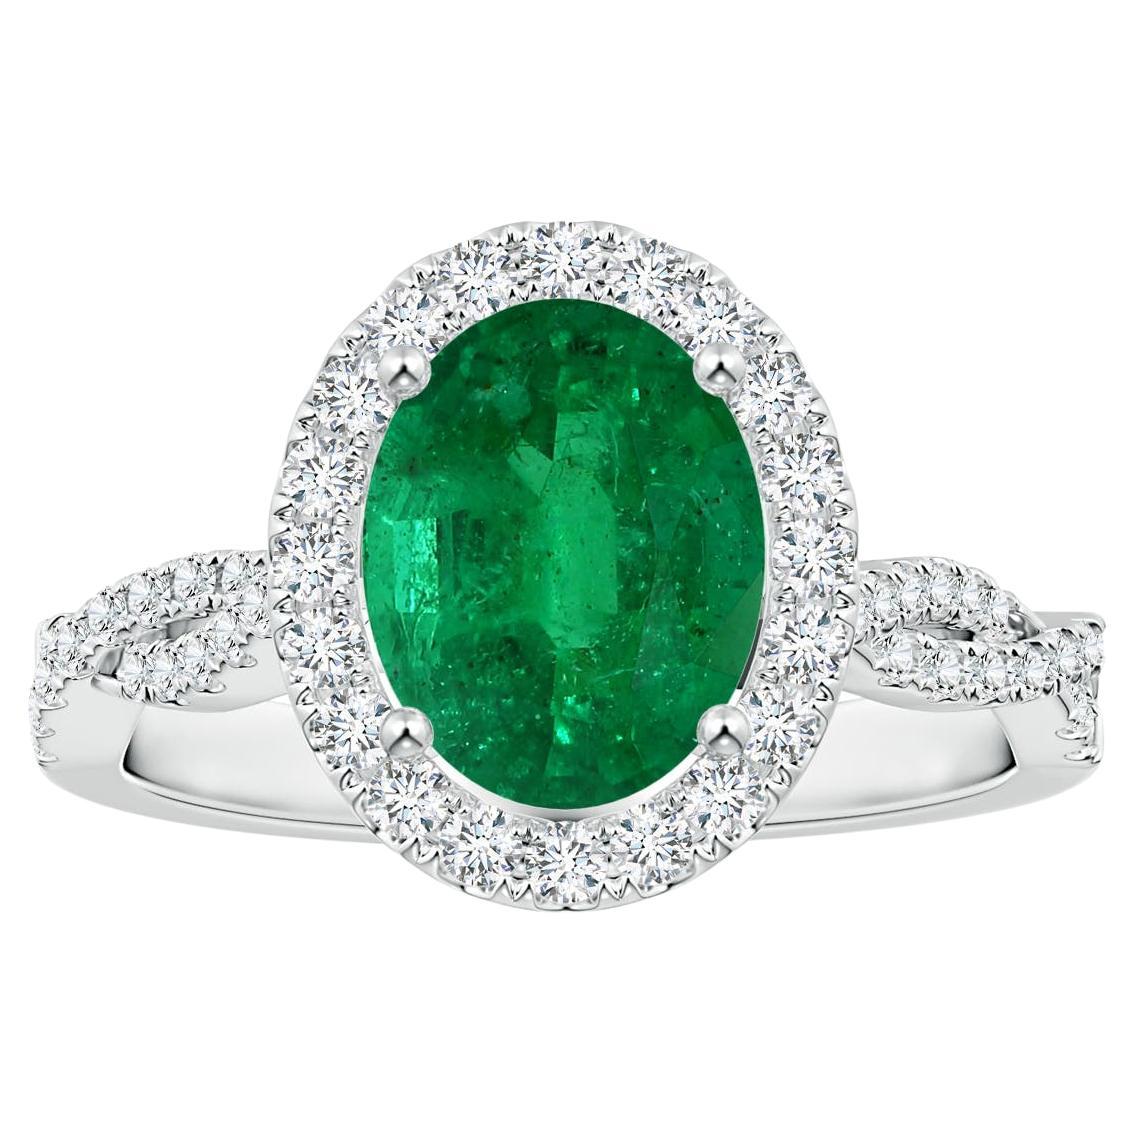 ANGARA GIA Certified Natural Emerald Halo Ring in Platinum with Diamond Shank